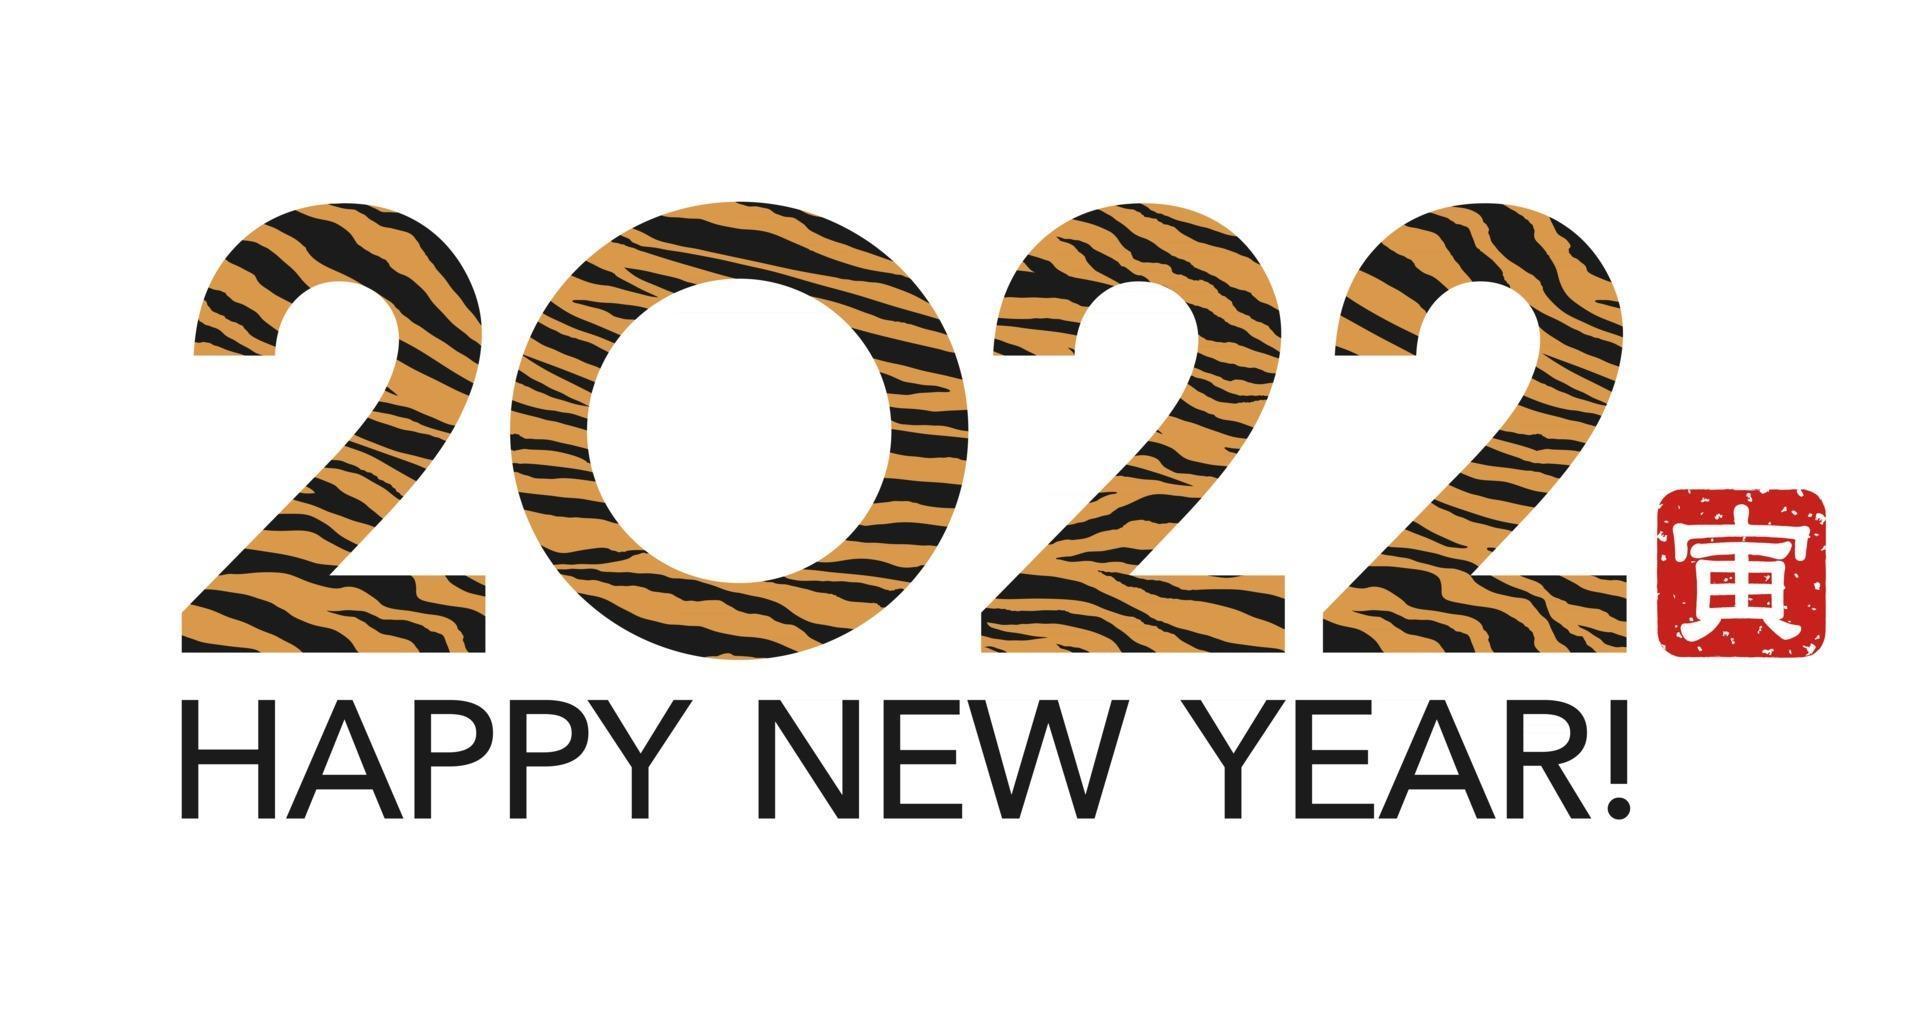 The Year 2022 New Years Greeting Symbol Decorated With Tiger Skin